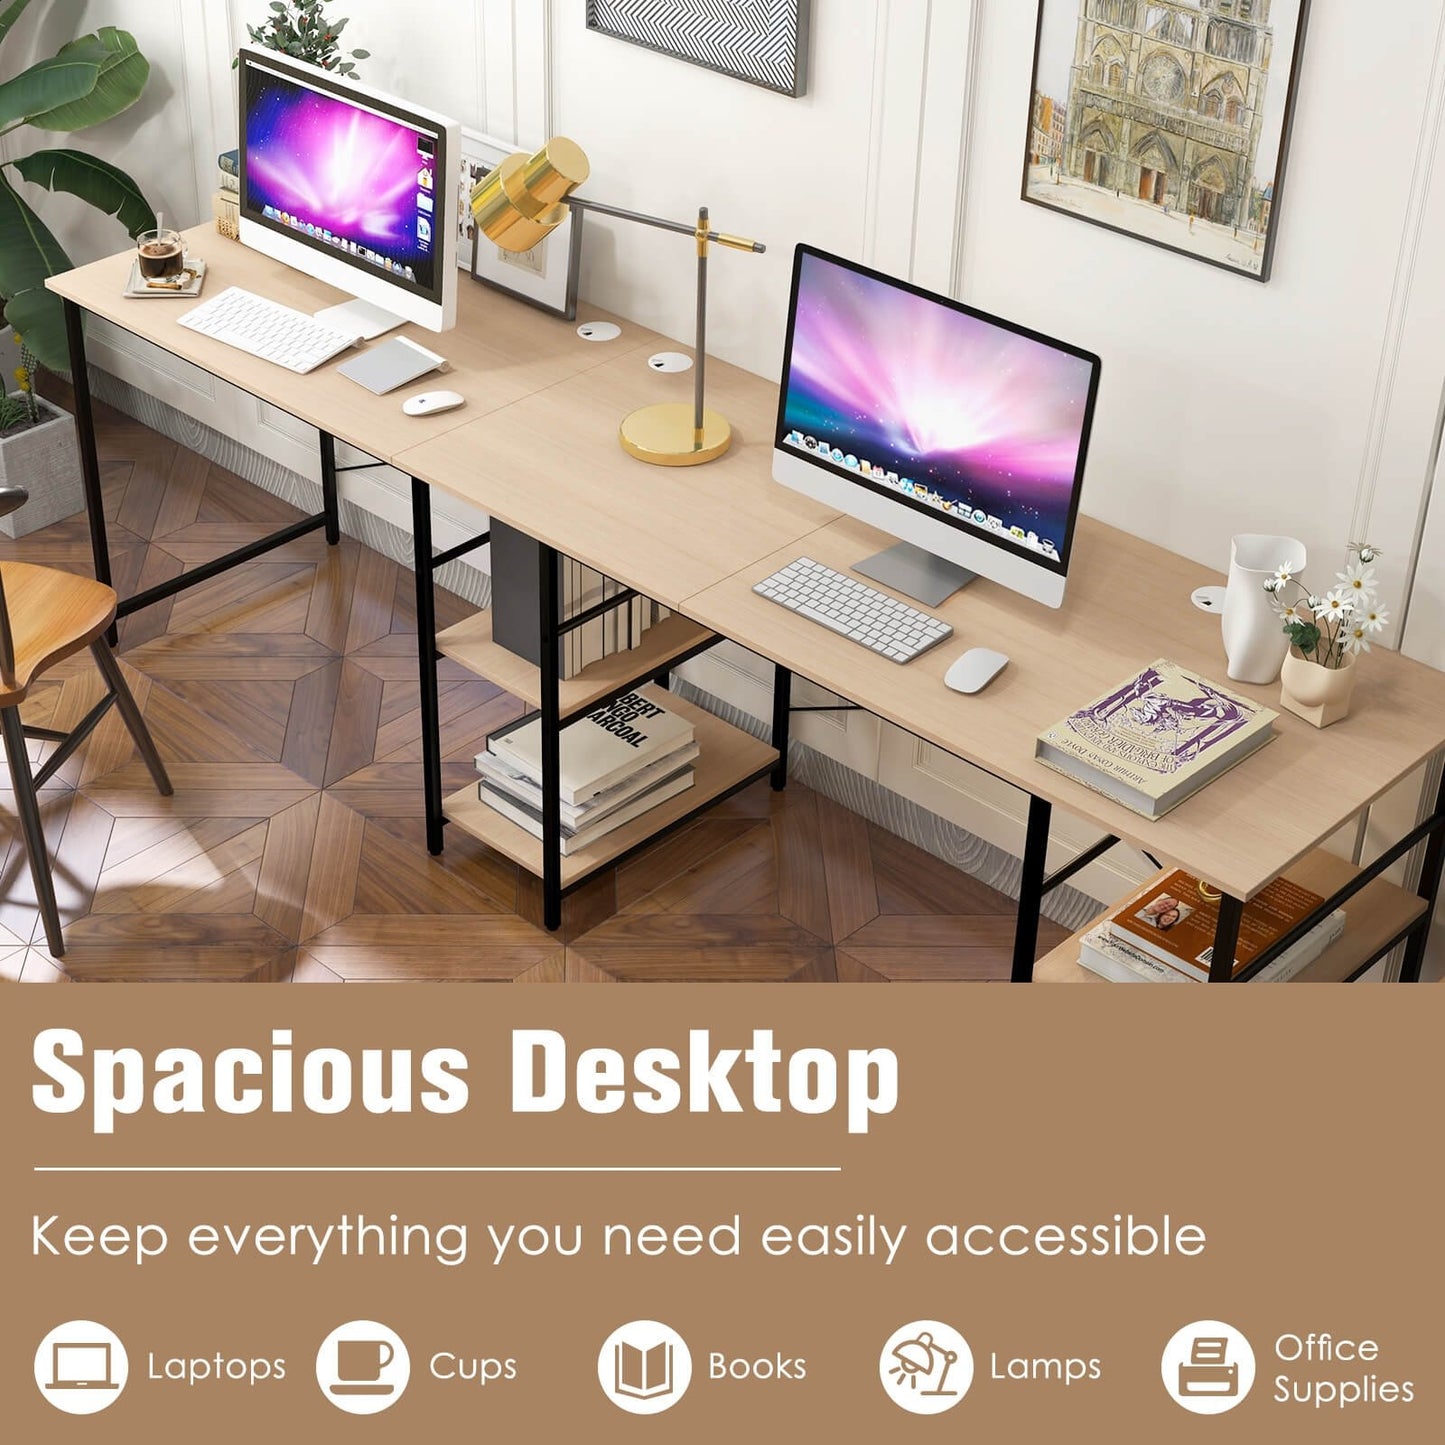 L Shaped Computer Desk with 4 Storage Shelves and Cable Holes, Natural - Gallery Canada